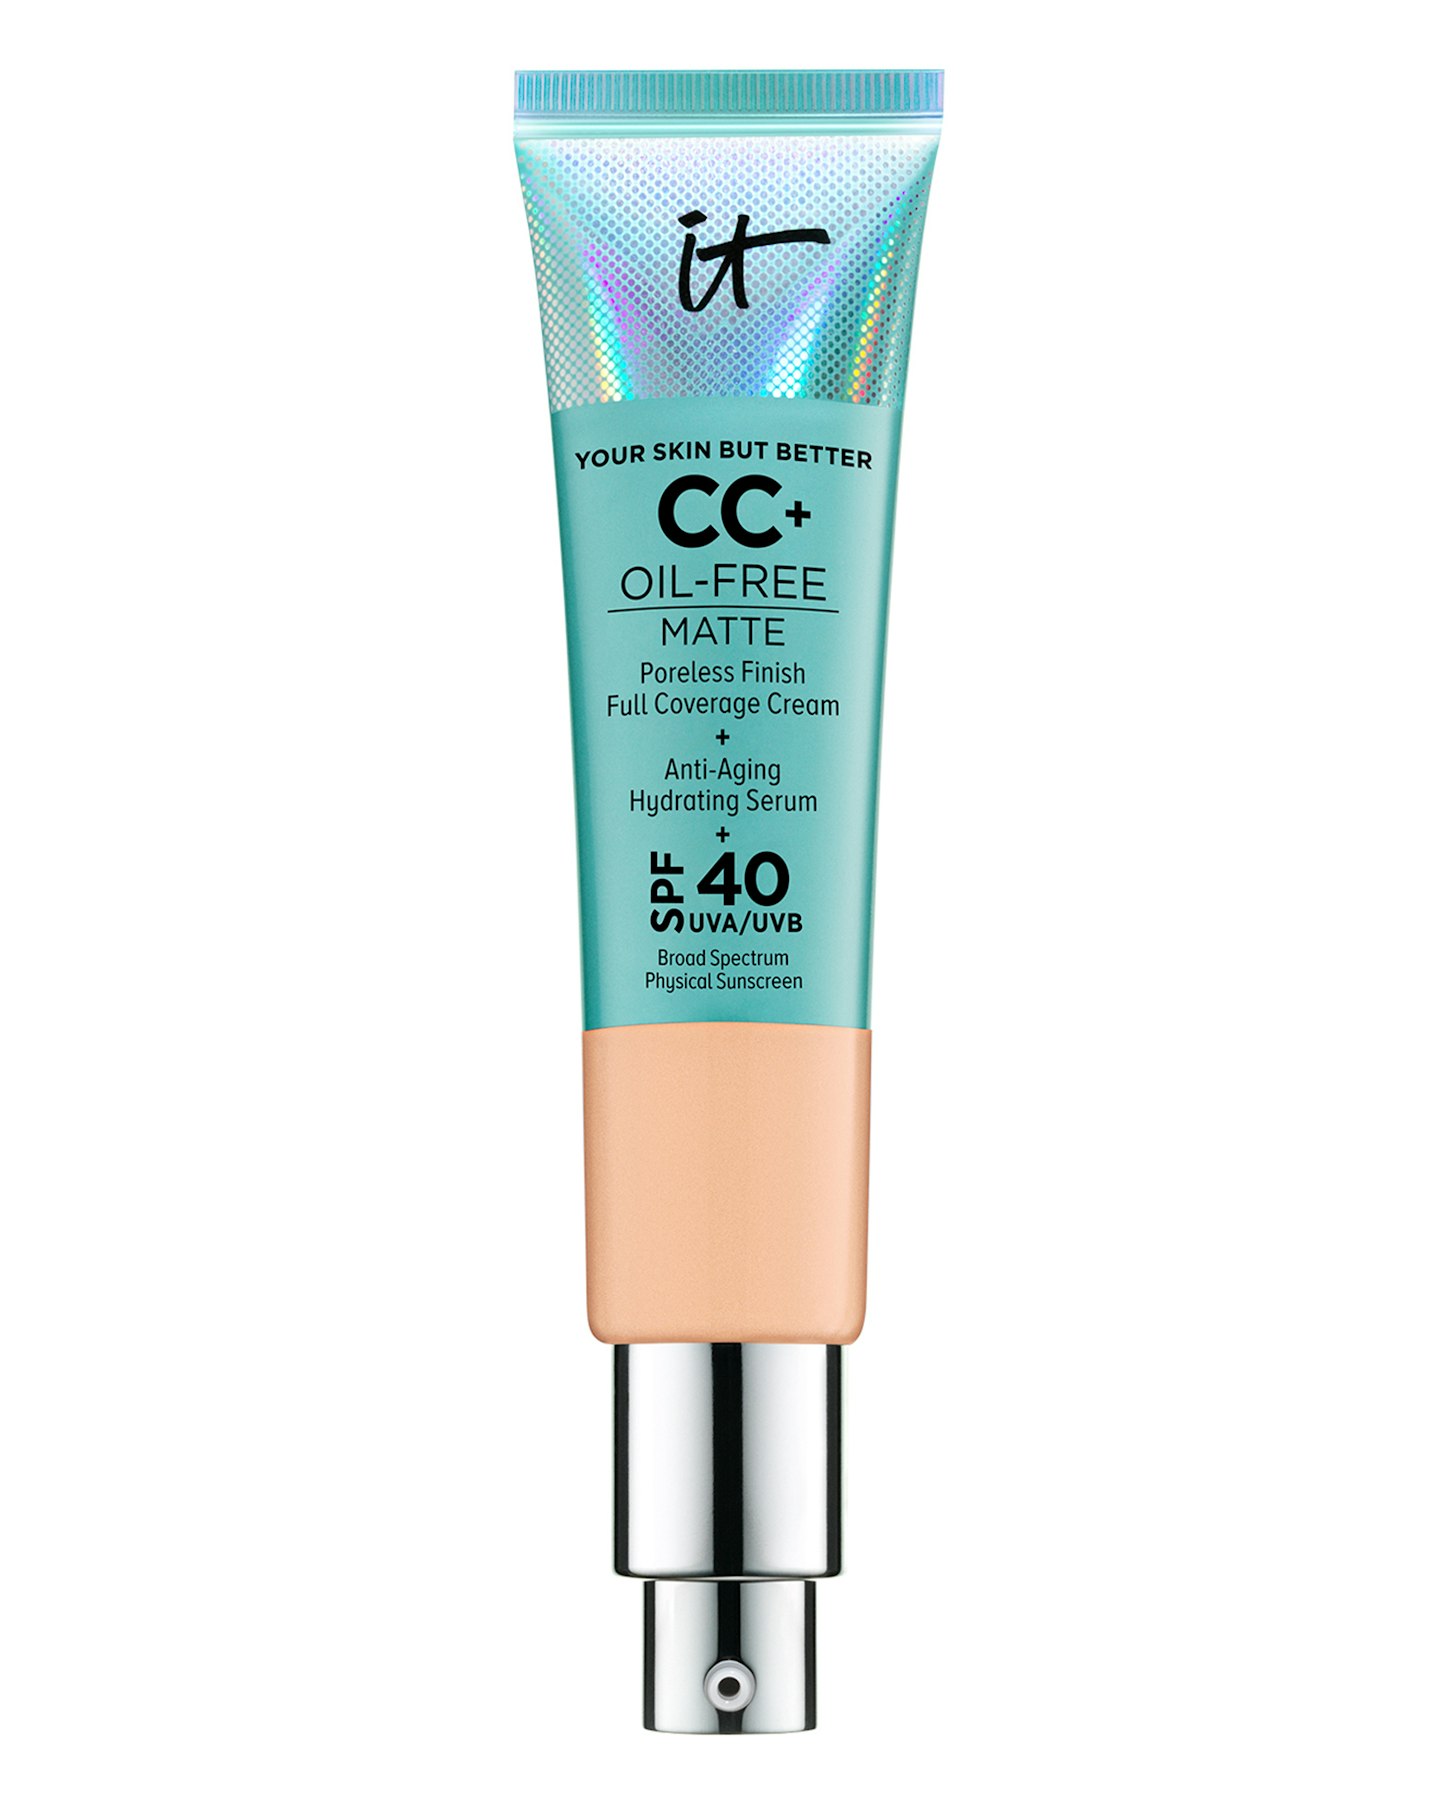 Best foundation for oily skin - It Cosmetics